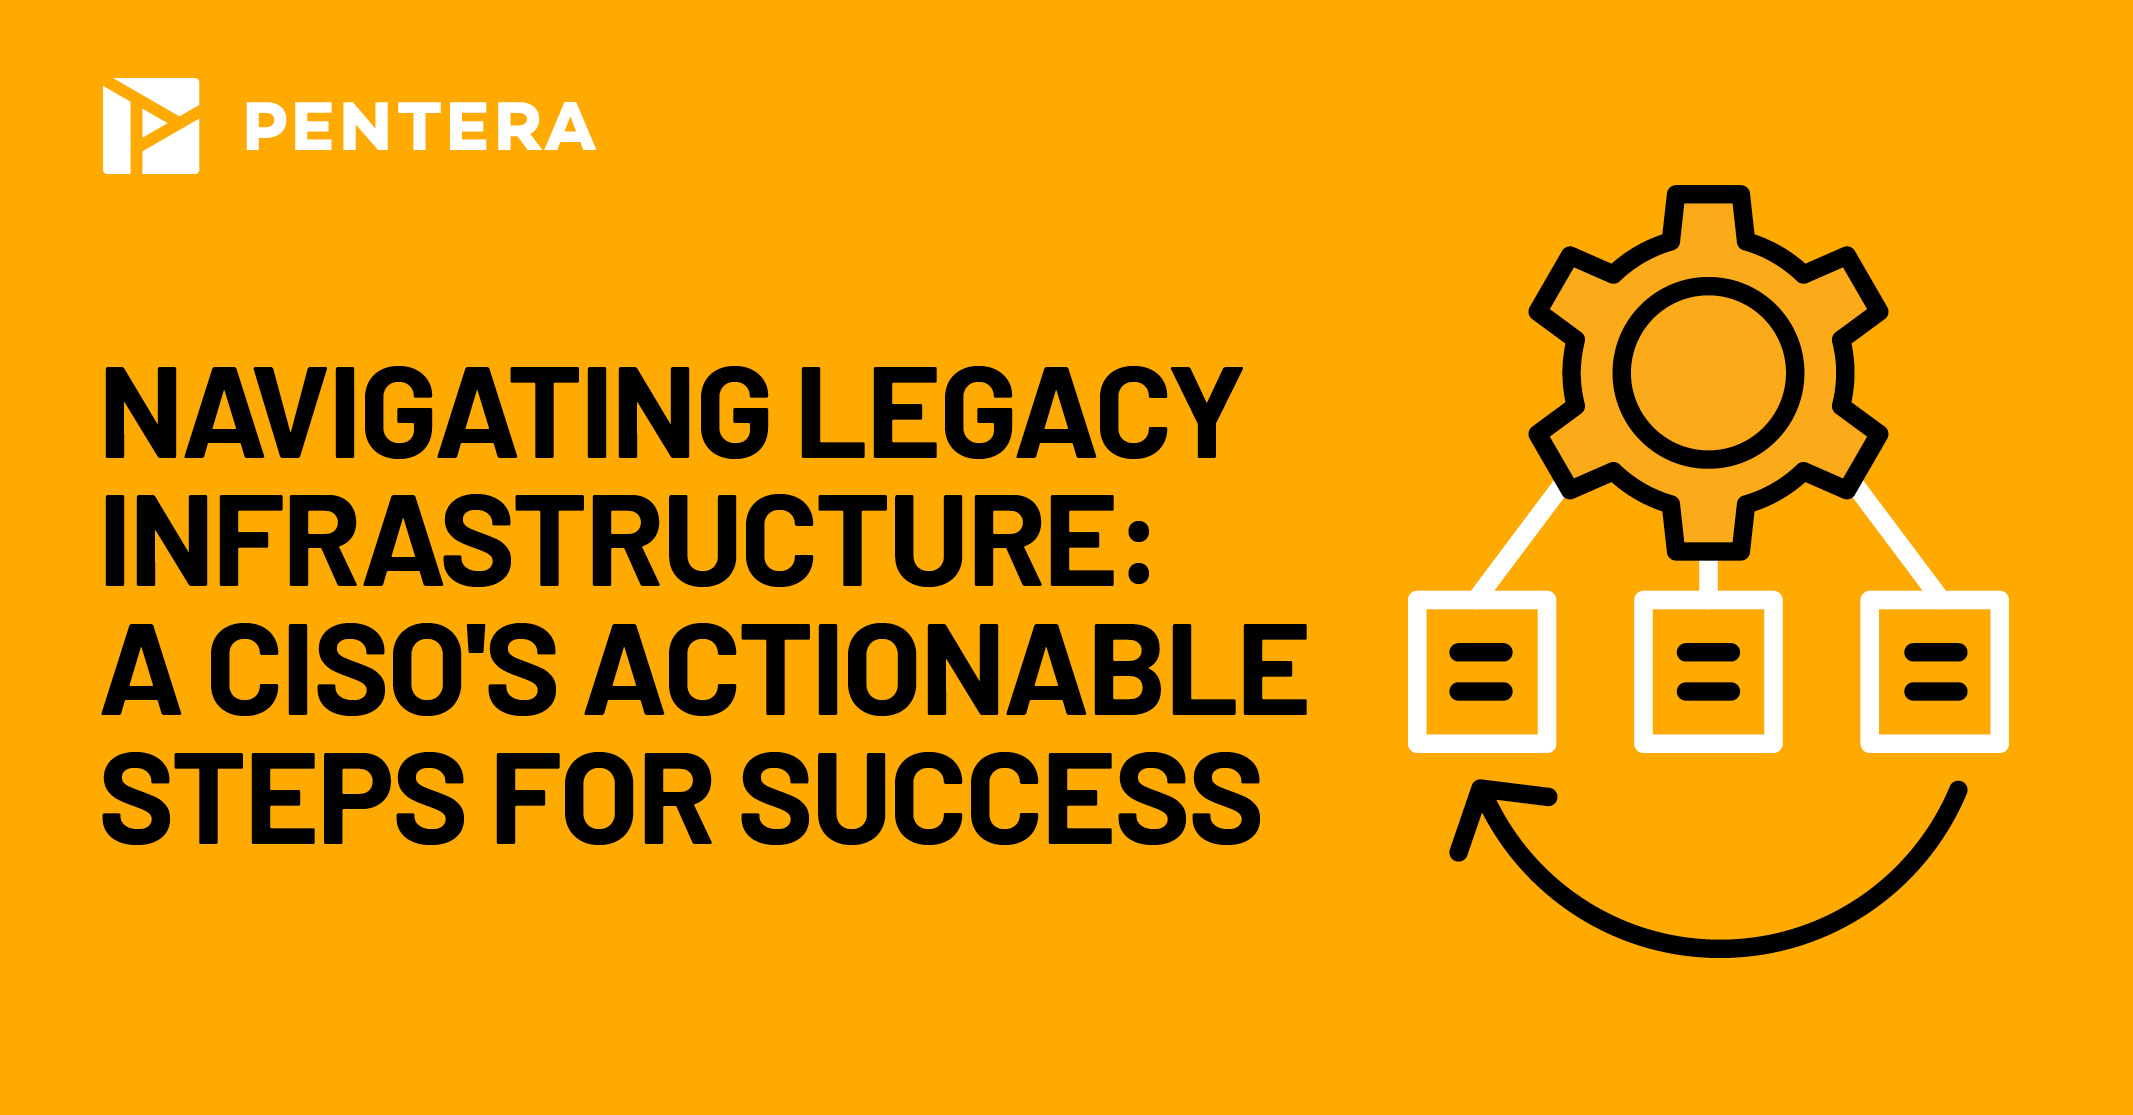 Navigating legacy infrastructure: A CISO’s  strategy for success